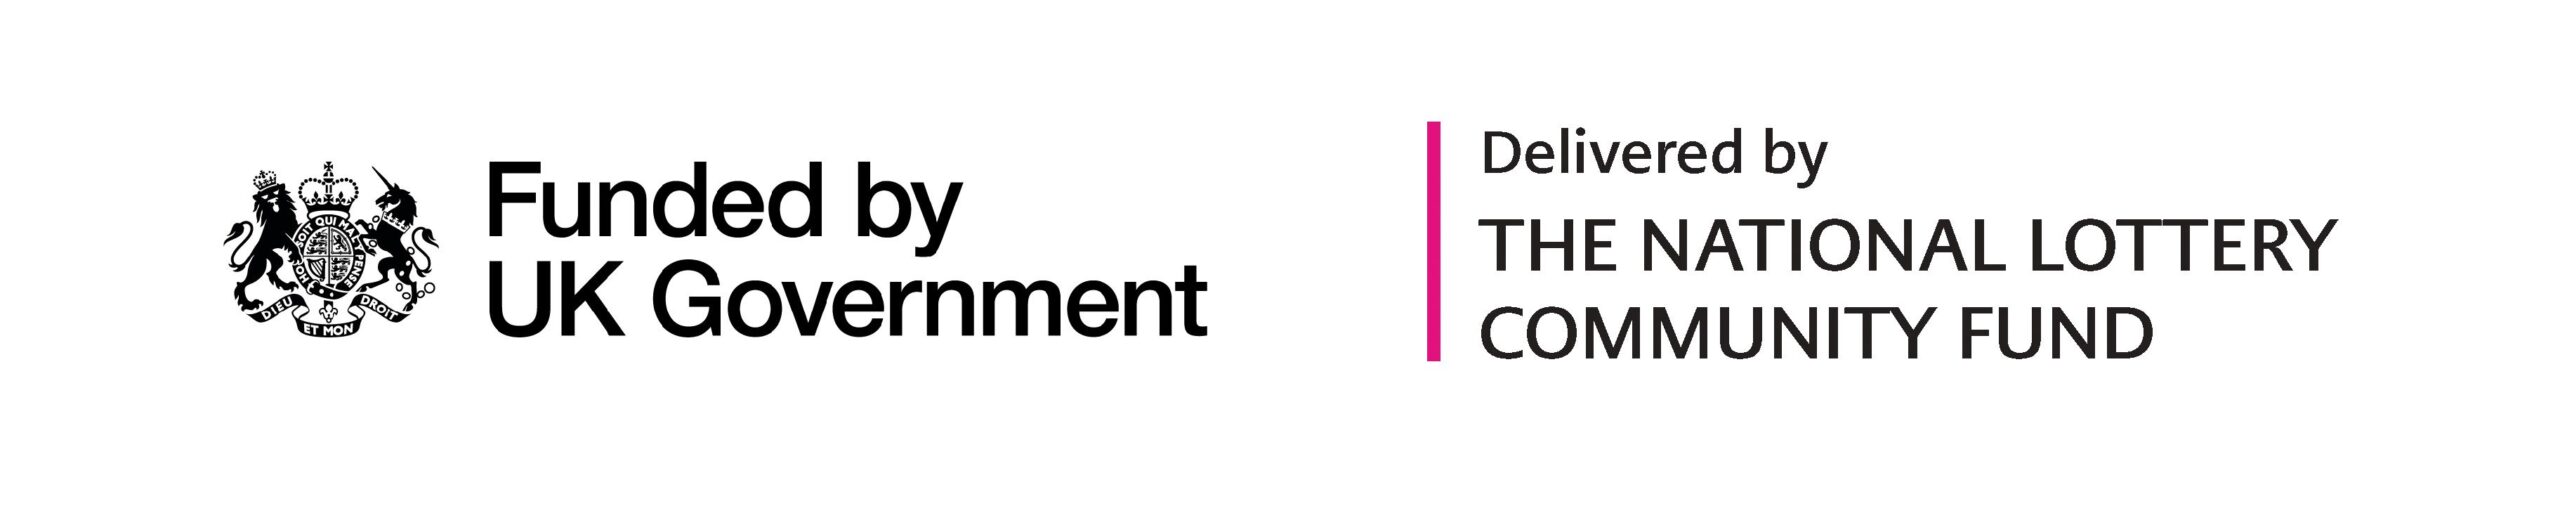 Funding logo for UK Government and The National Lottery Community Fund